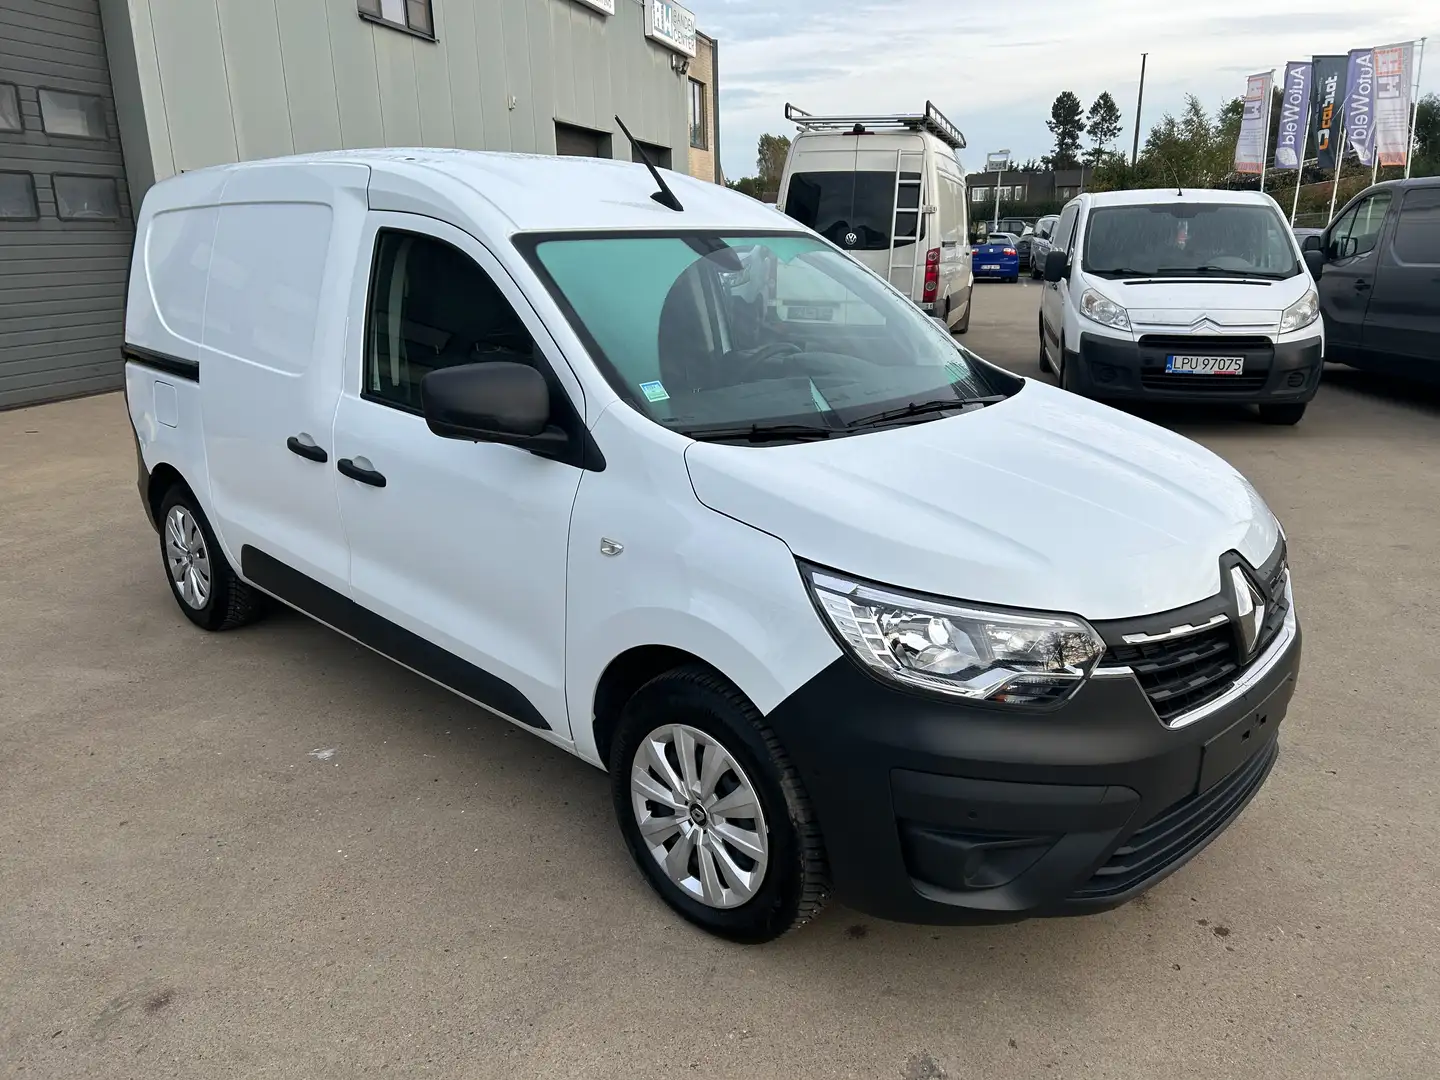 Renault Express 1.5dci airco navi camera cruise enzo confort uitv. Wit - 2